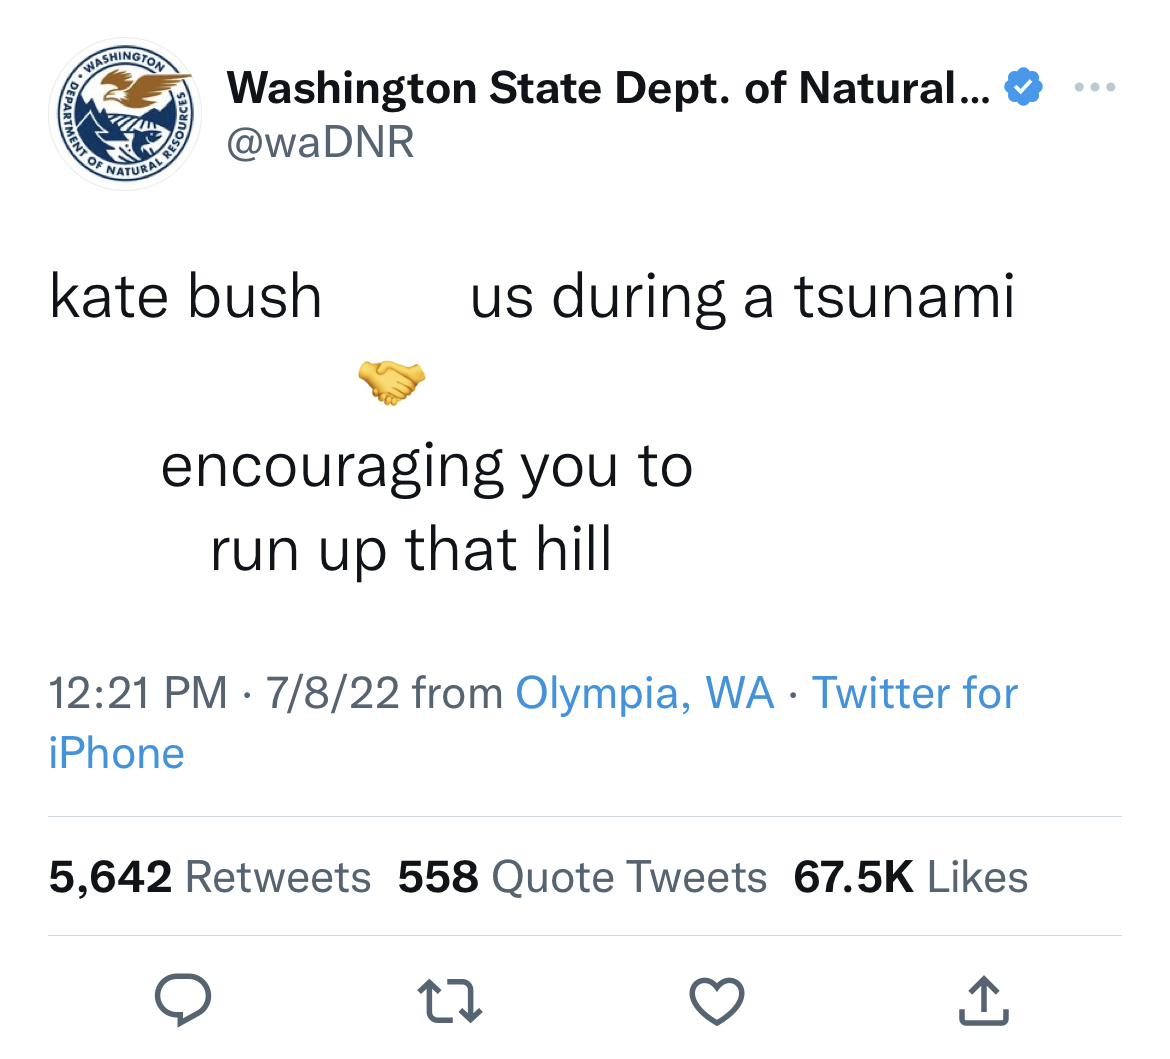 Washington Department of Natural Resources tweets - Internet meme - Ment Of Washington Natural Resou Washington State Dept. of Natural... kate bush us during a tsunami encouraging you to run up that hill 7822 from Olympia, Wa Twitter for iPhone 5,642 558 